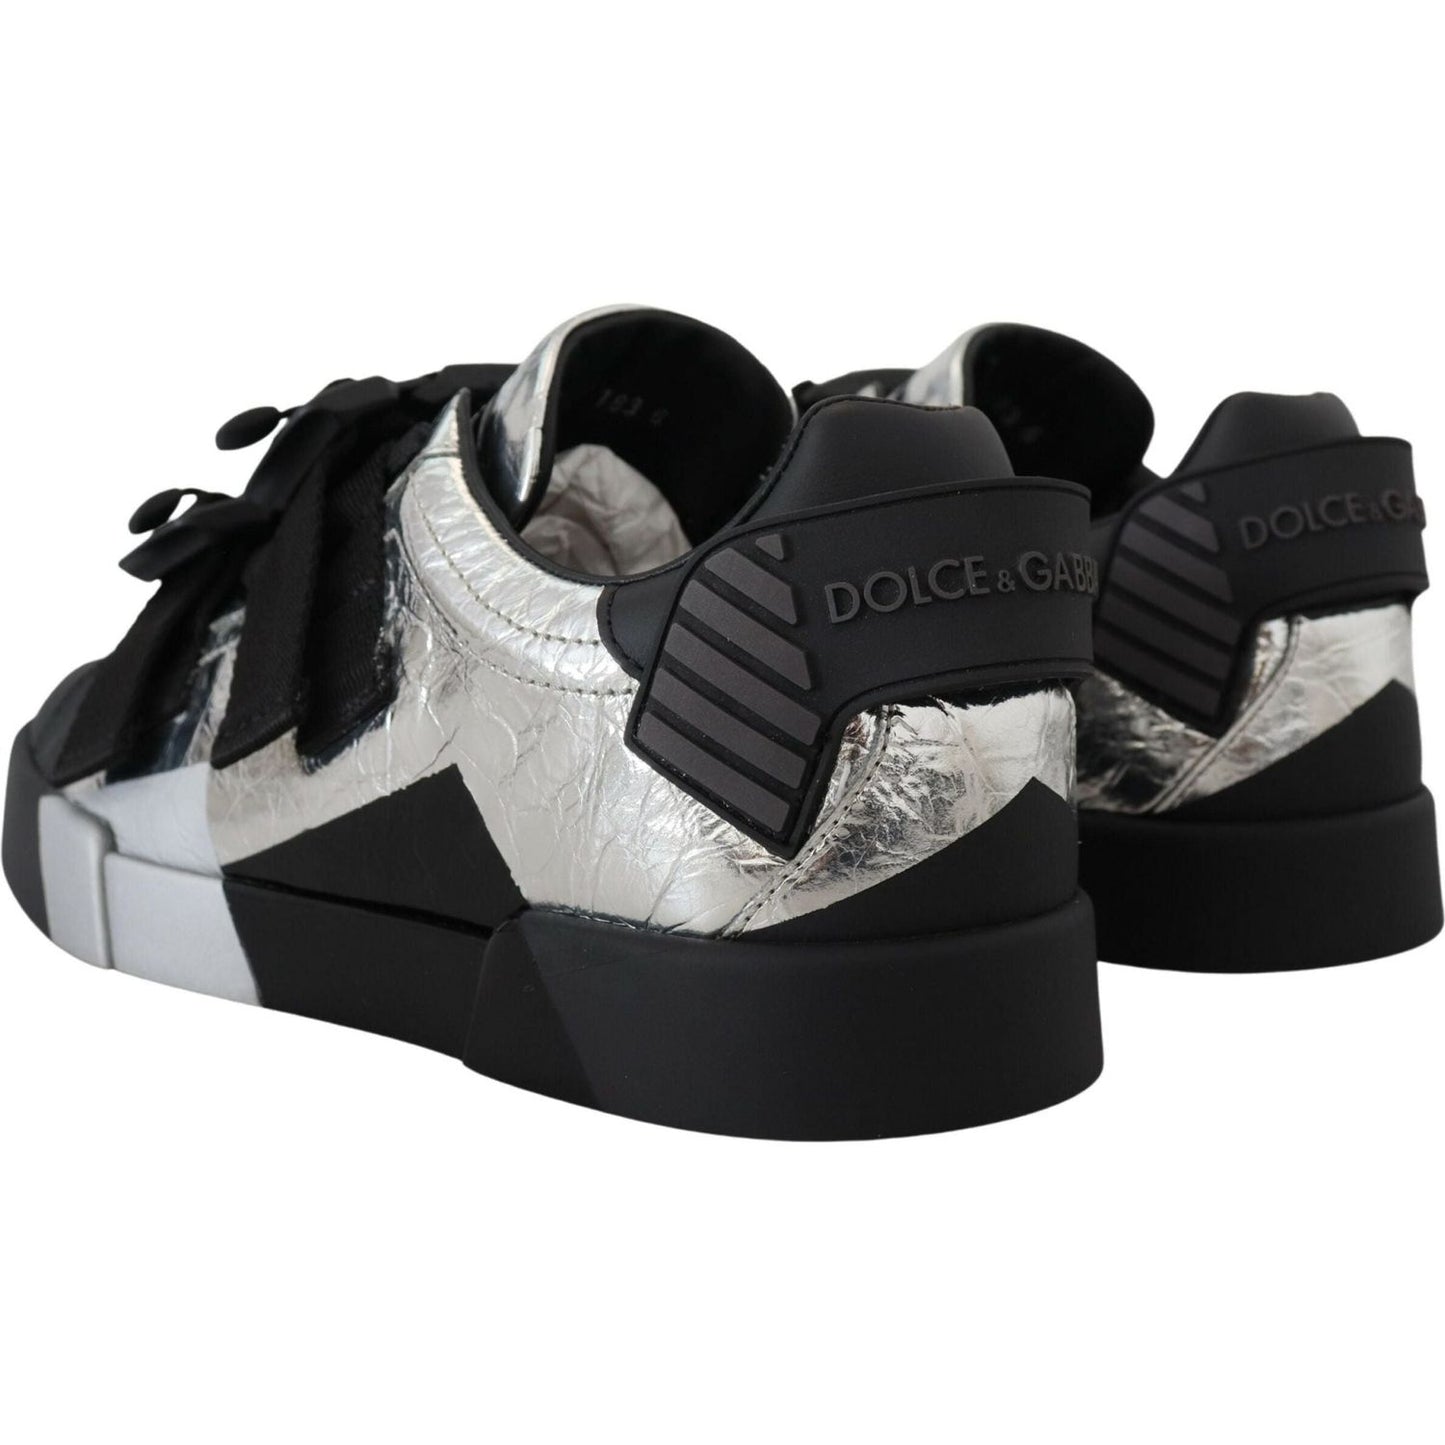 Dolce & Gabbana Exclusive Silver and Black Low Top Leather Sneakers black-silver-leather-low-top-sneakers-casual-shoes